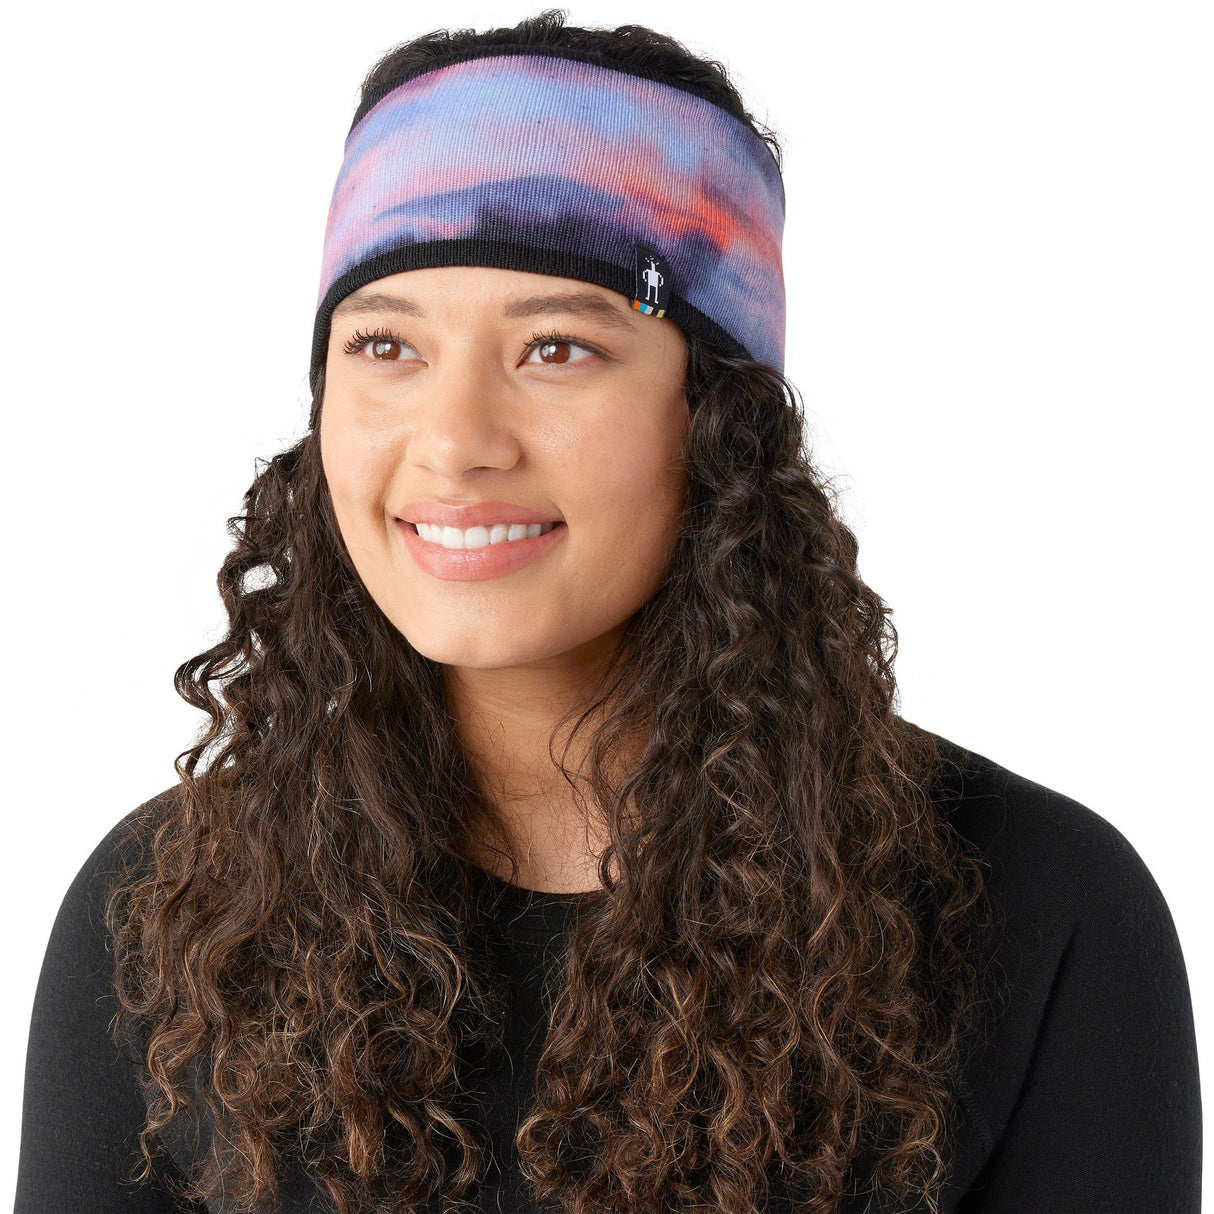 Smartwool Printed Headband  -  One Size Fits Most / Multi Color